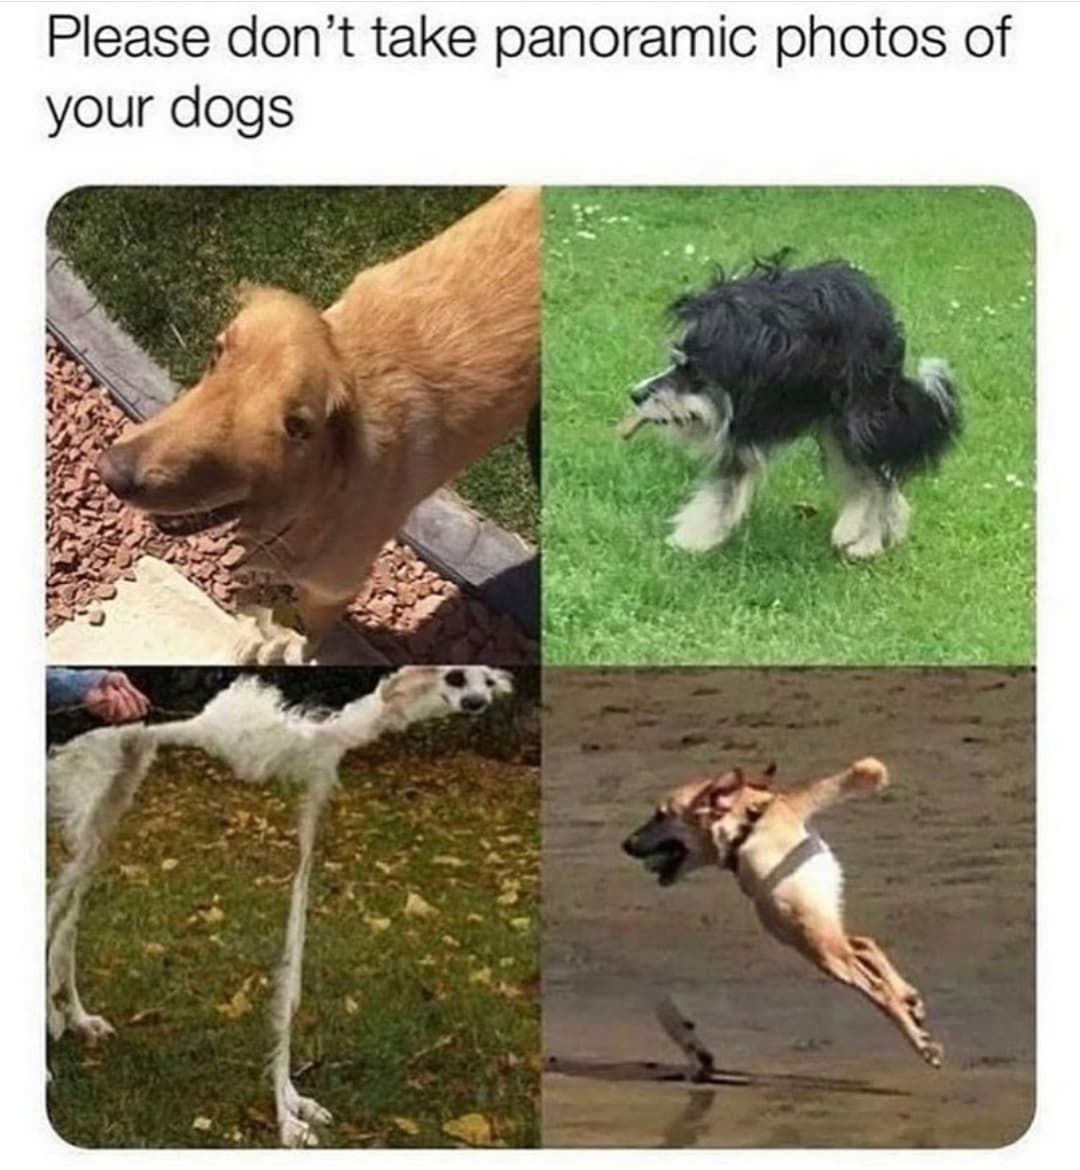 please don't take panoramic photos of your dogs, wtf, lol